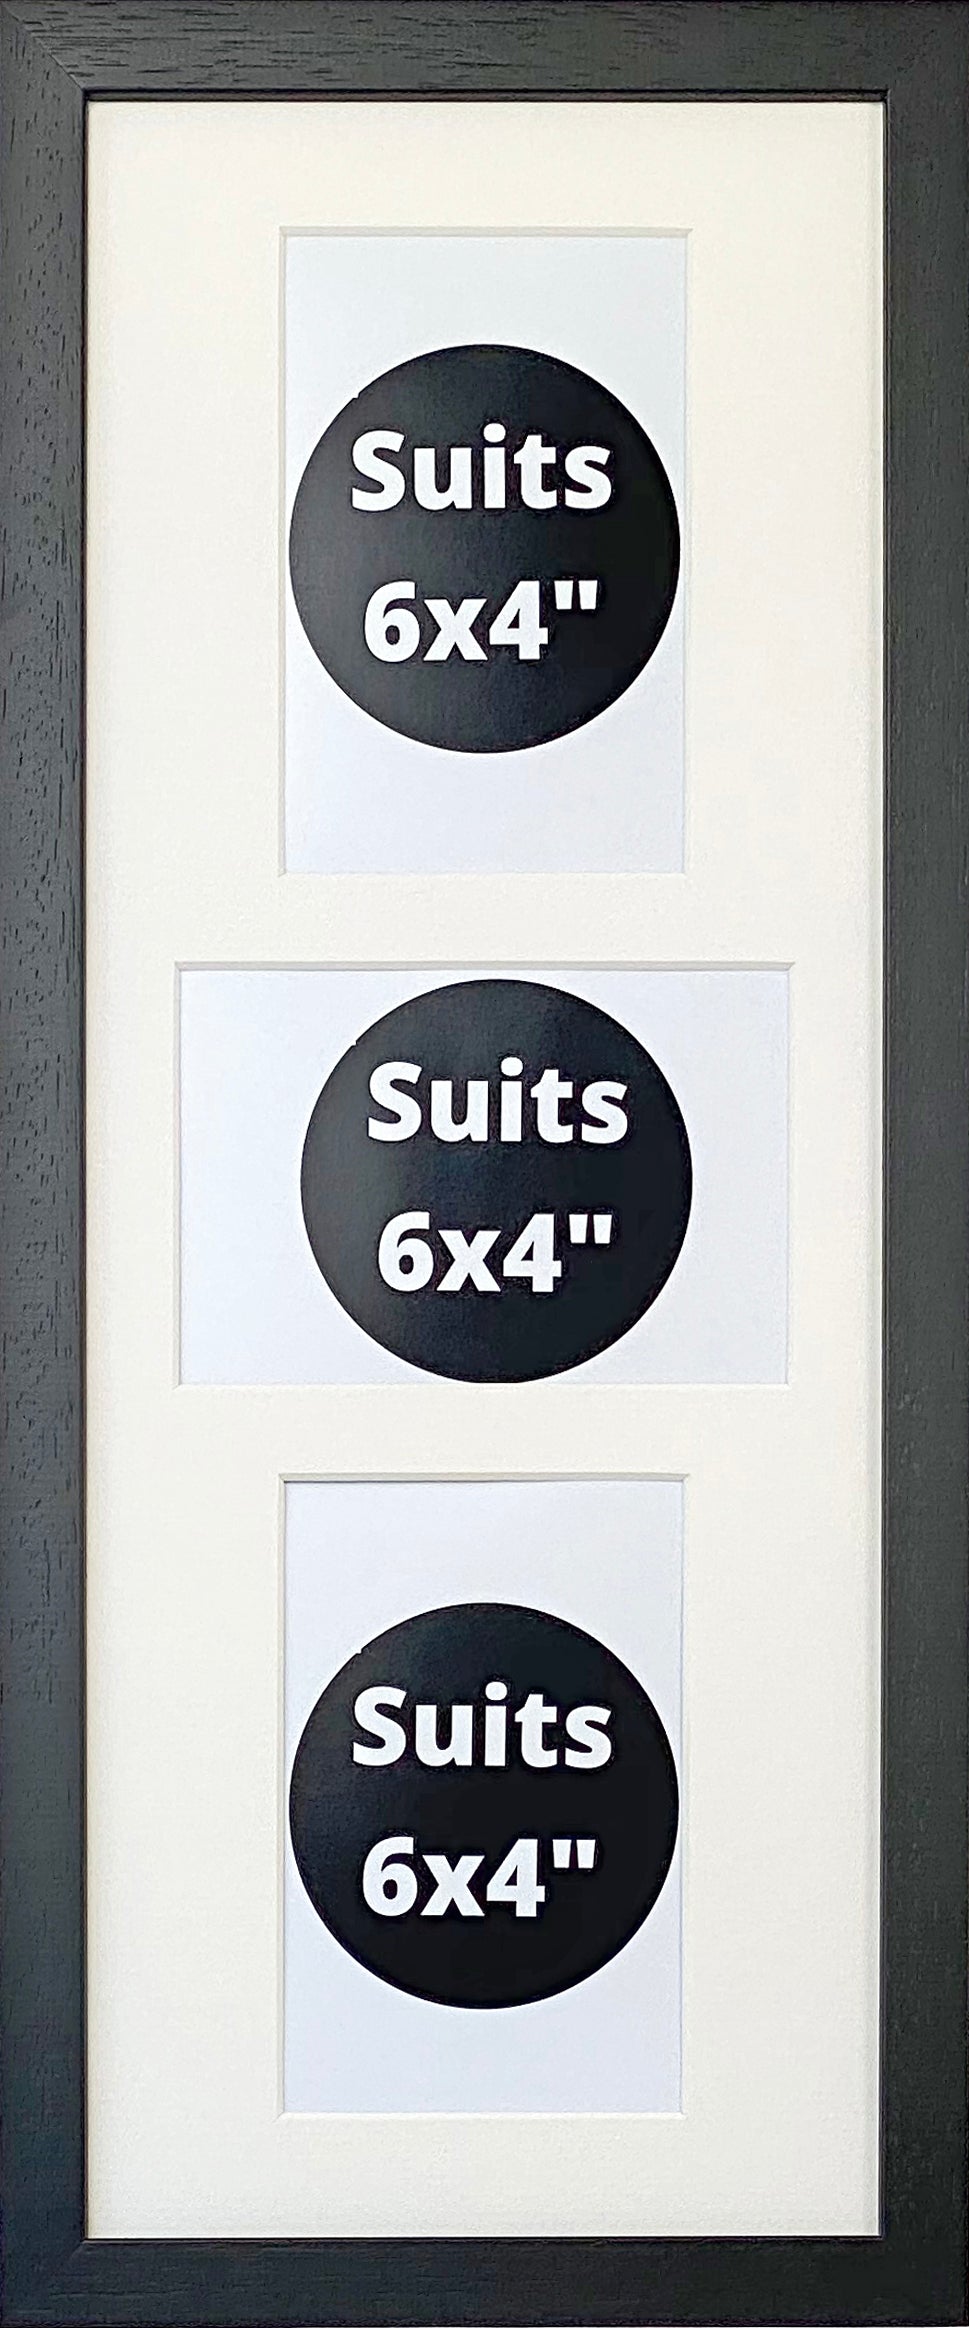 Suits Three 6x4" Photos. 20x50cm. Wooden Multi Photo Frame. - PhotoFramesandMore - Wooden Picture Frames